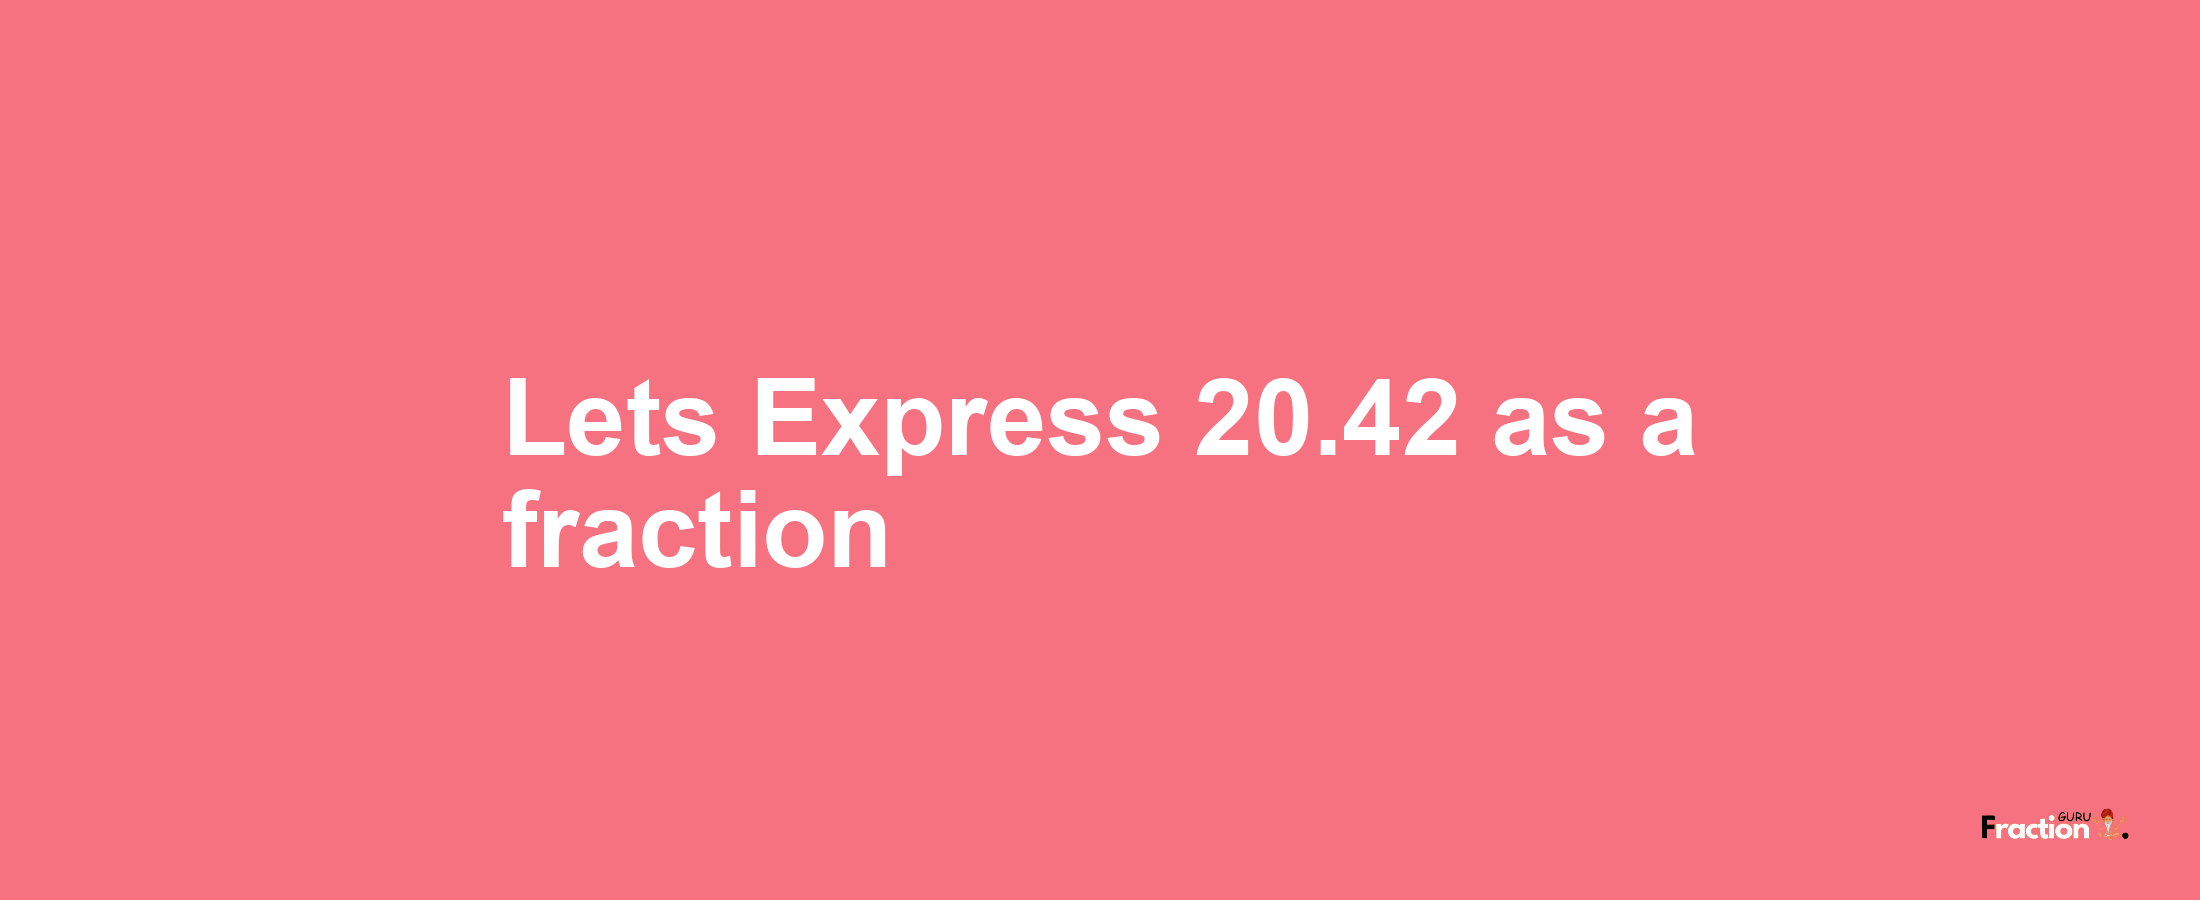 Lets Express 20.42 as afraction